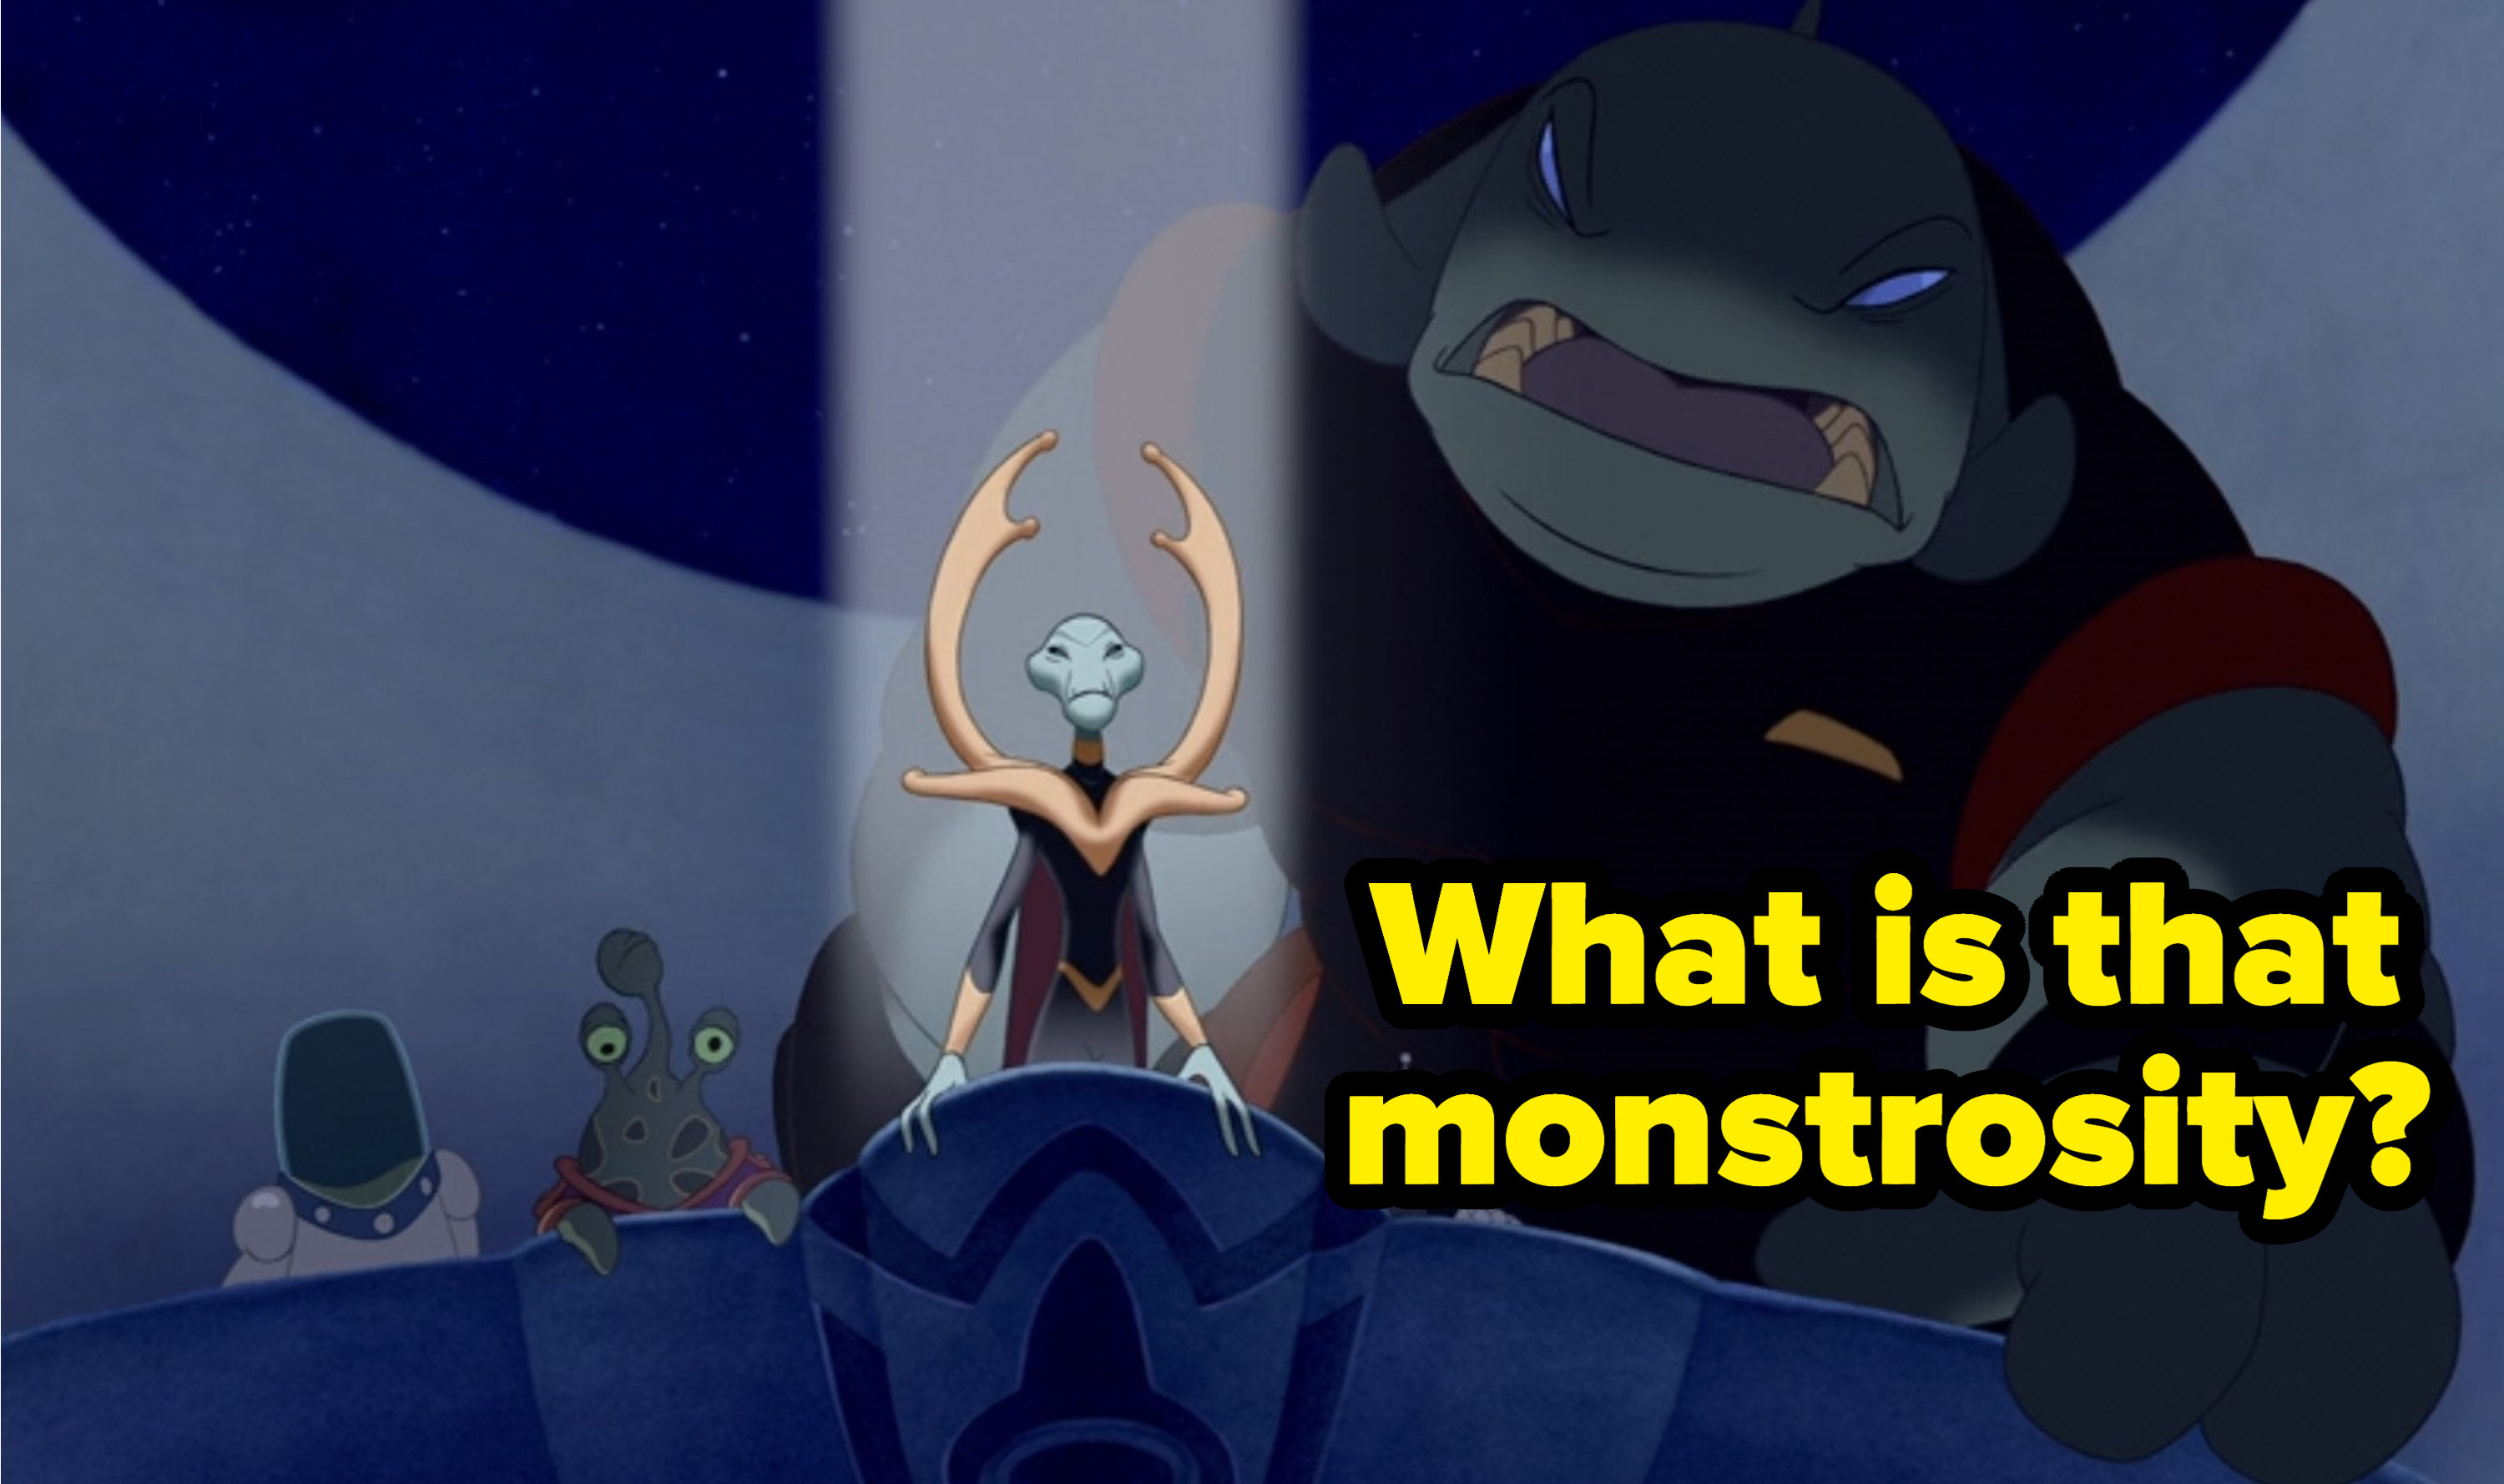 Gantu asking what is that monstrosity in Lilo and Stitch